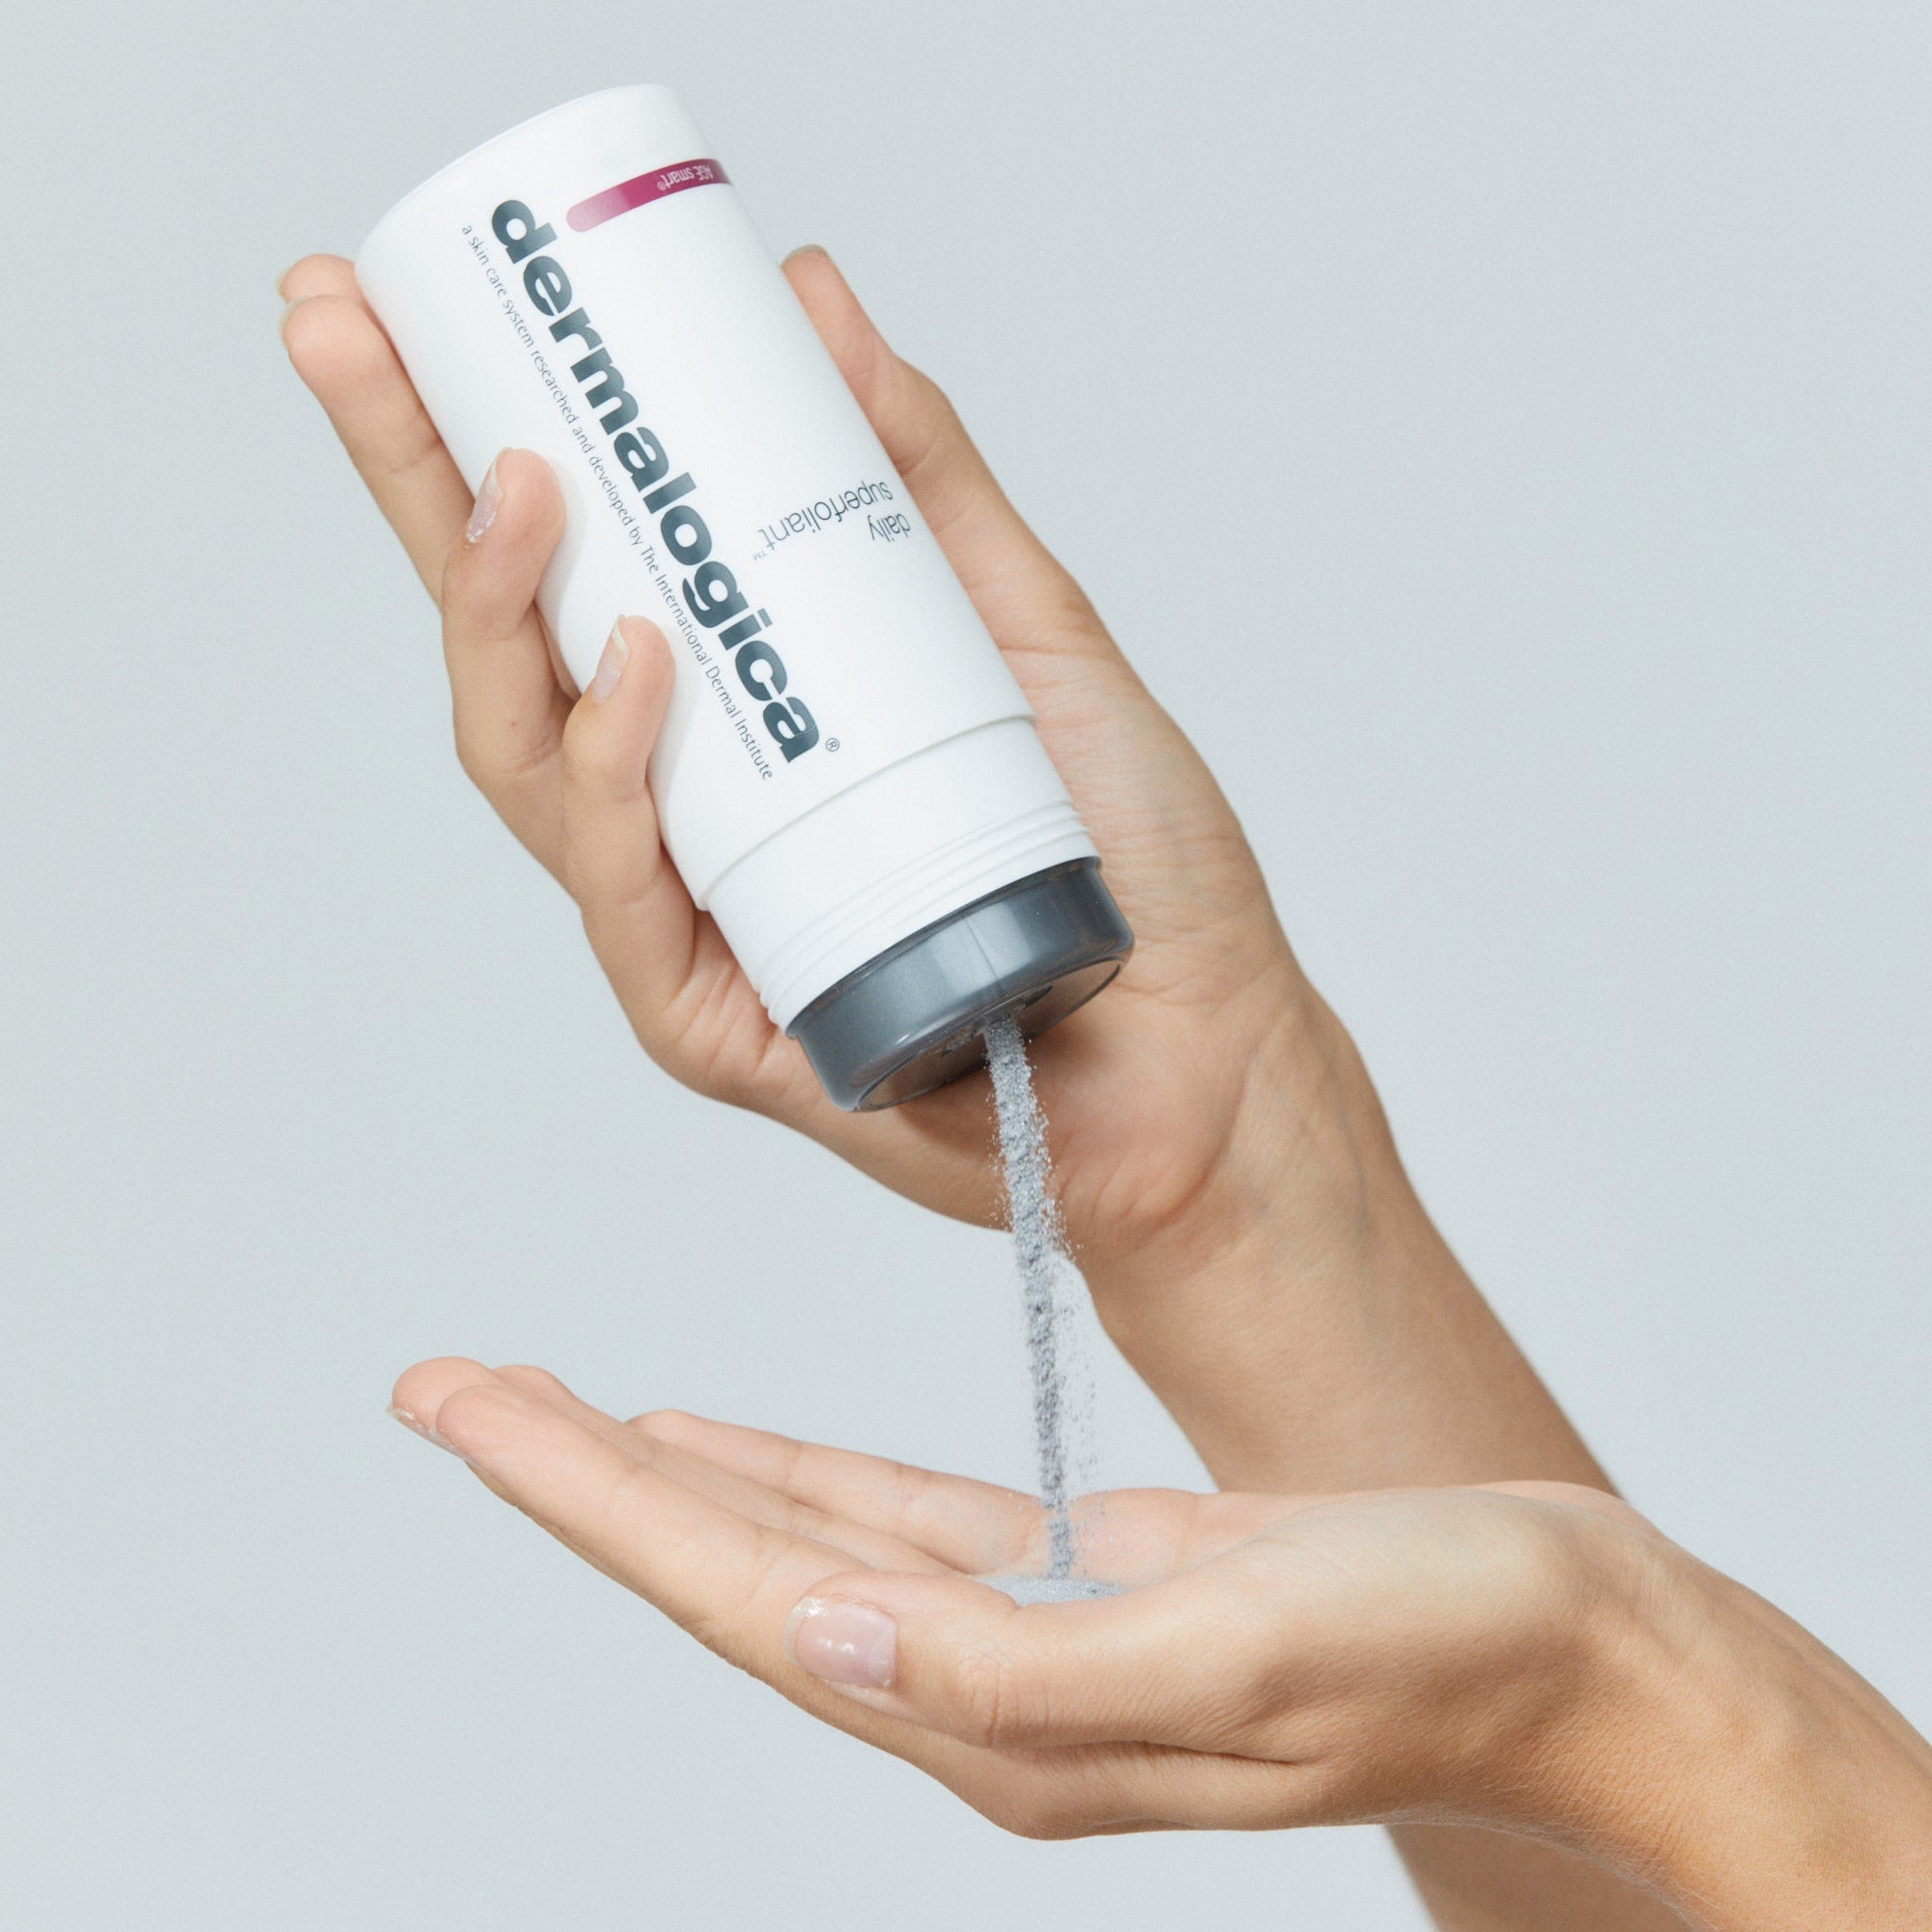 DERMALOGICA DAILY SUPERFOLIANT